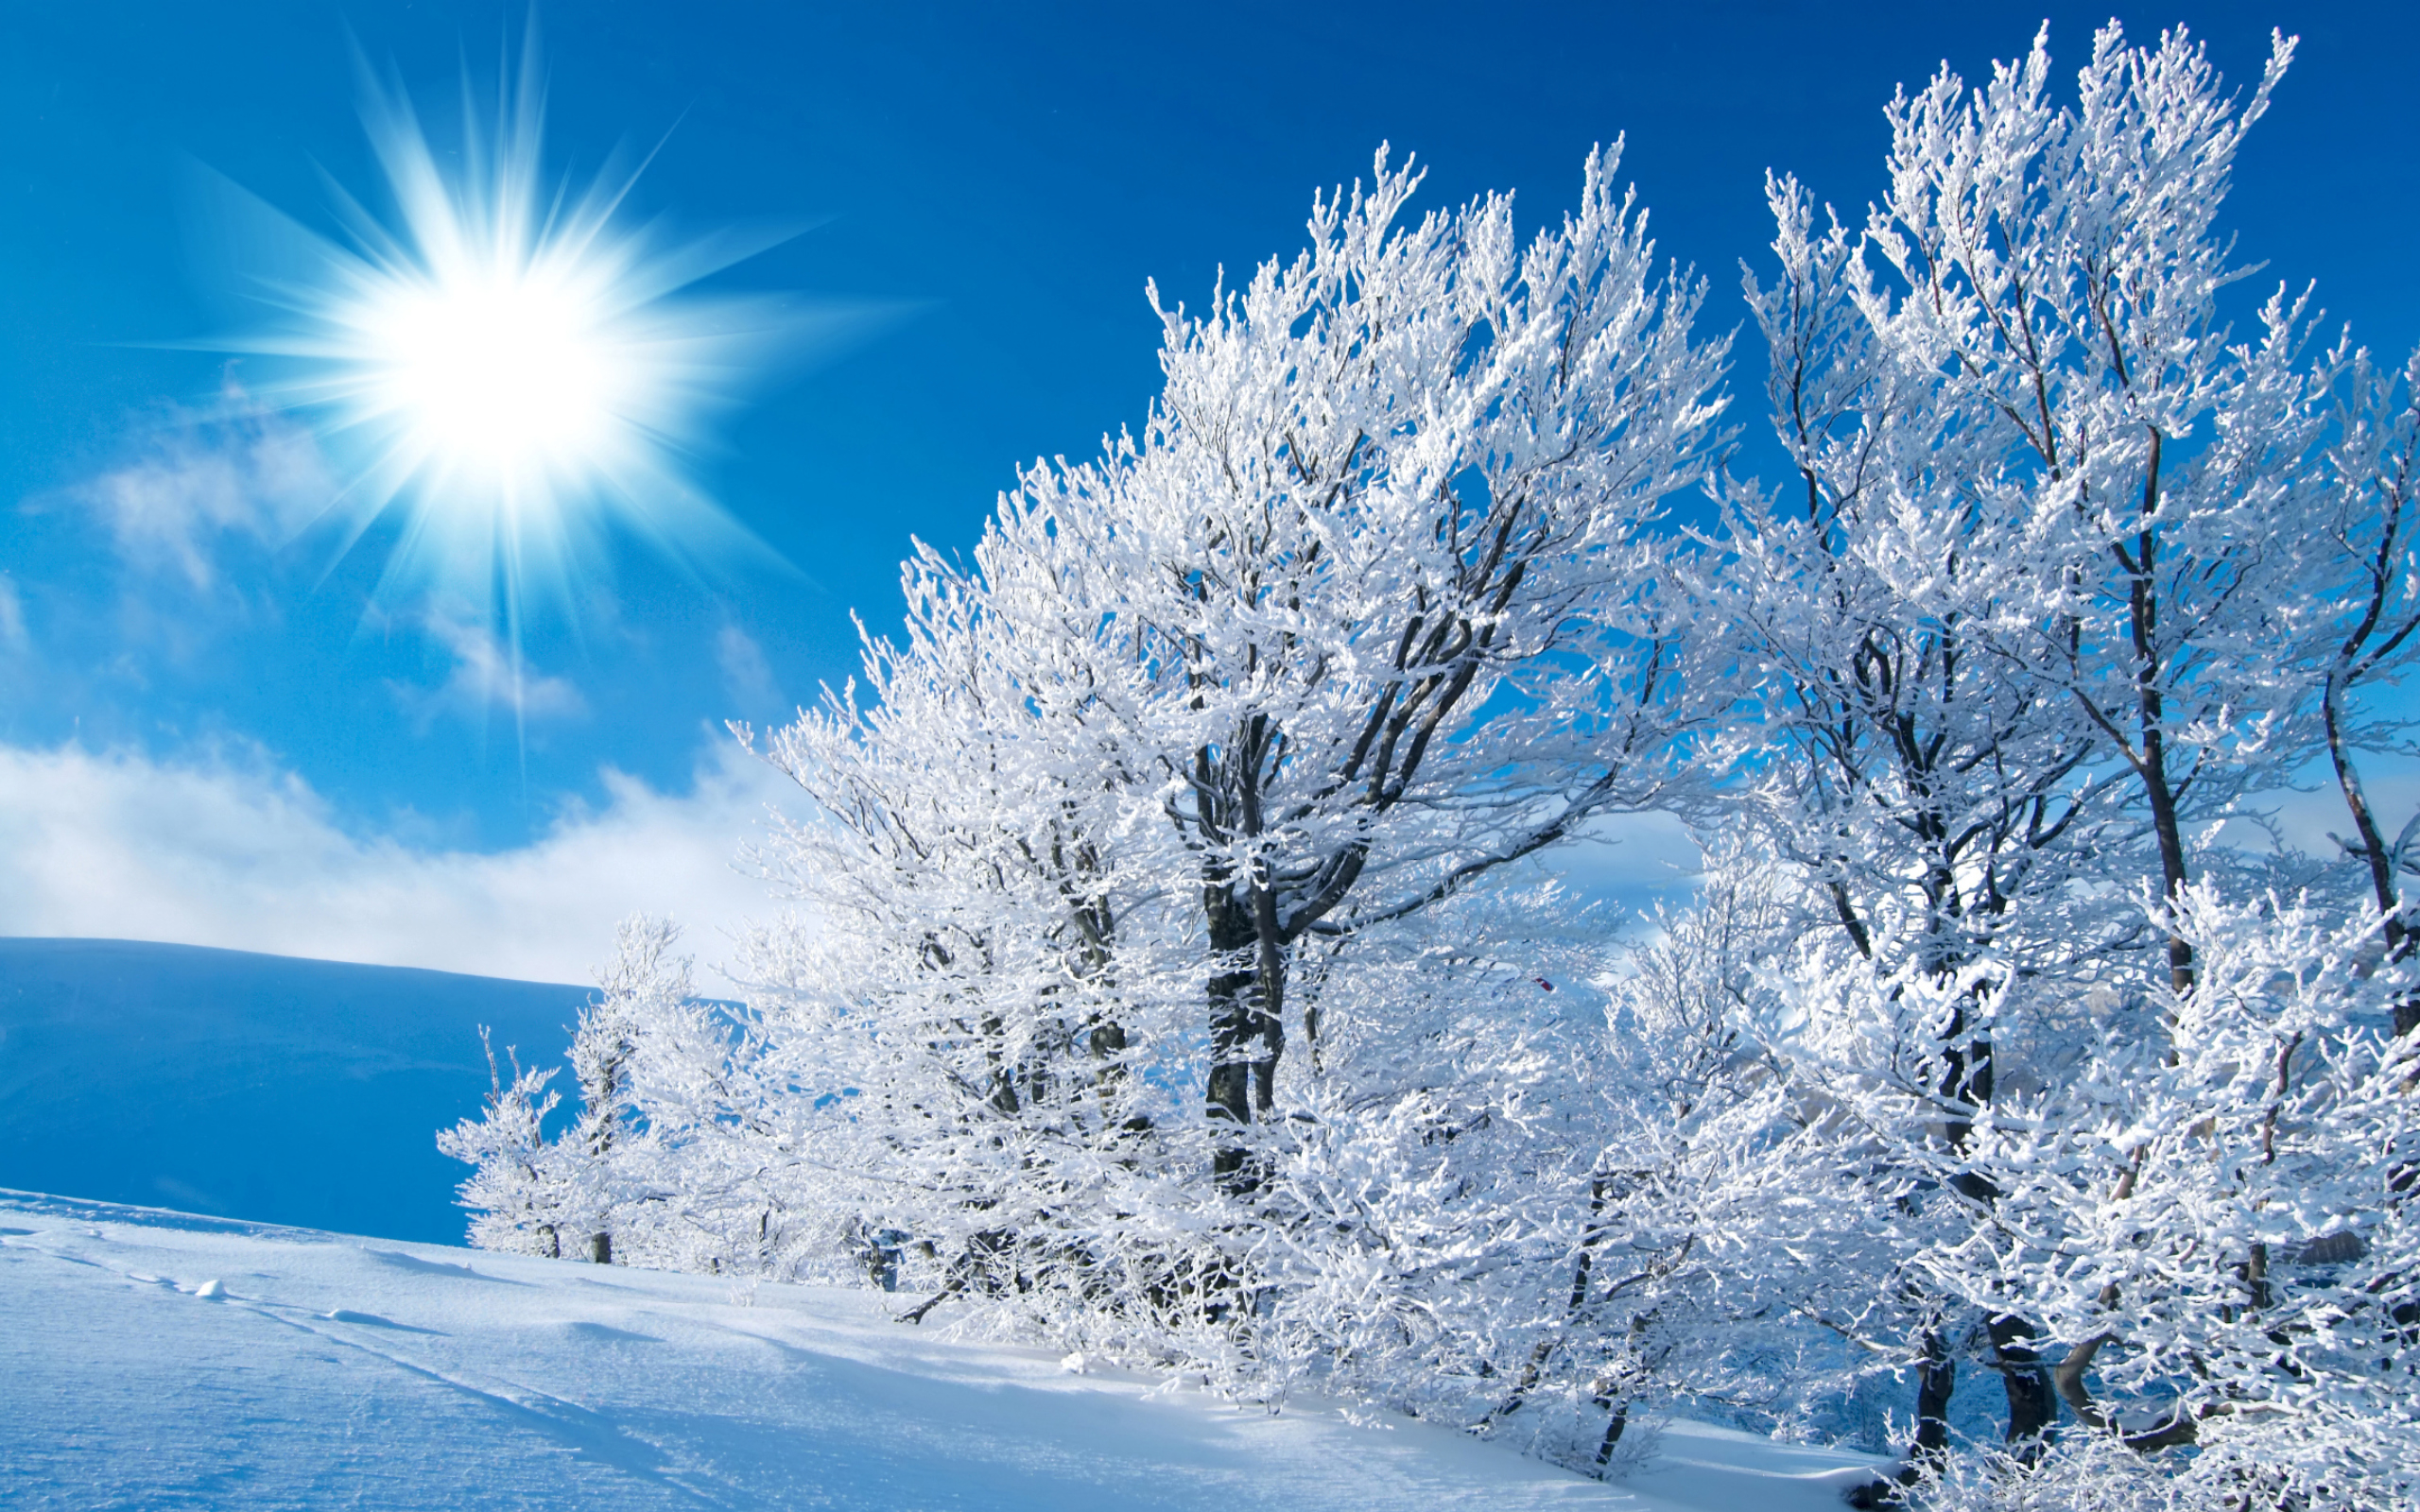 Please check our latest hd wallpaper widescreen below and bring beauty to your desktop. Winter HD Wallpapers